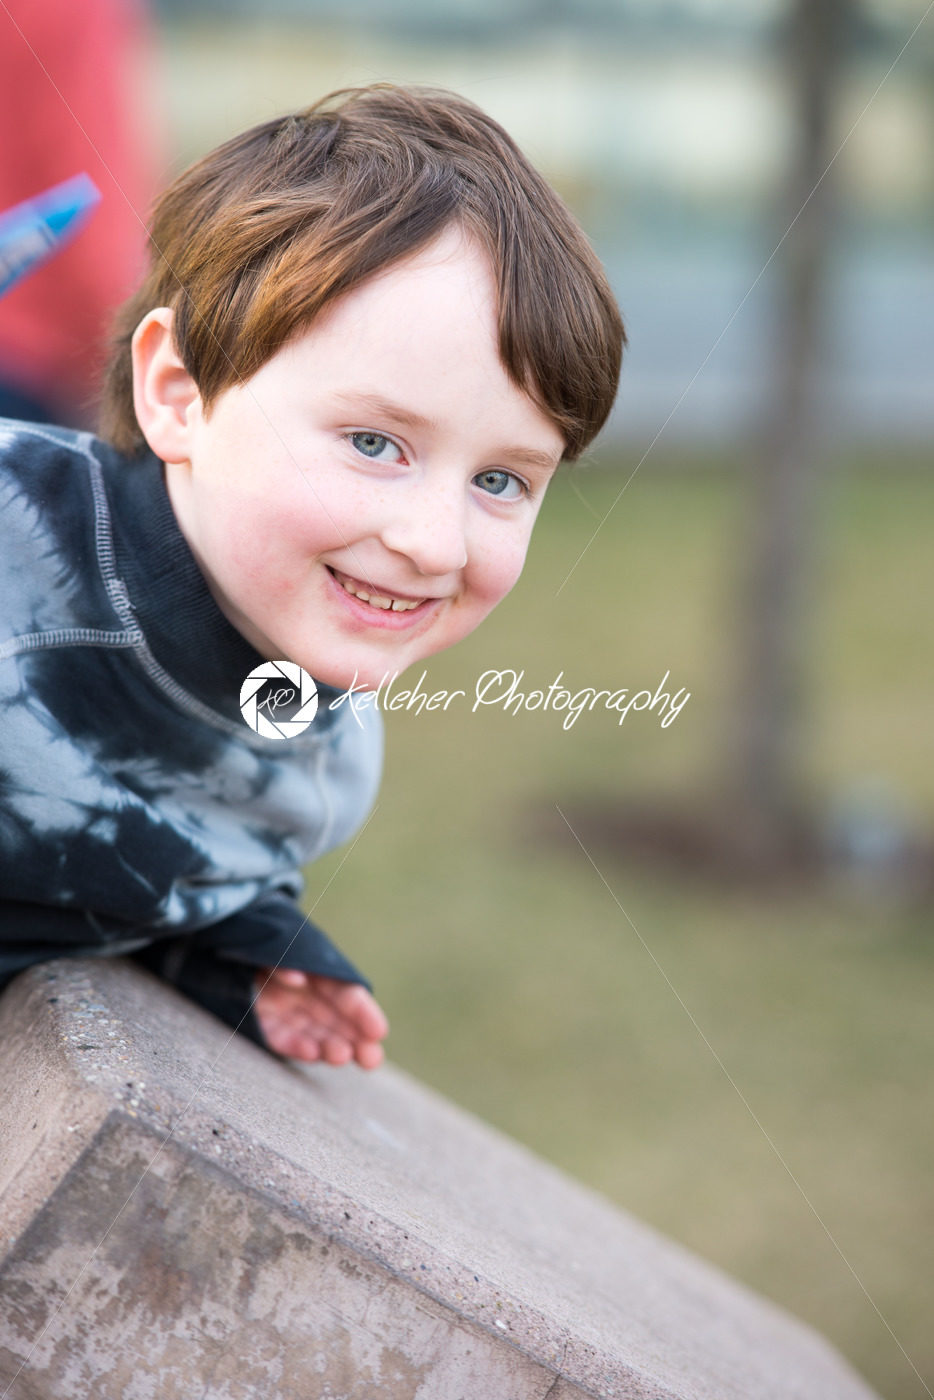 Young boy leaning over looking and smiling - Kelleher Photography Store